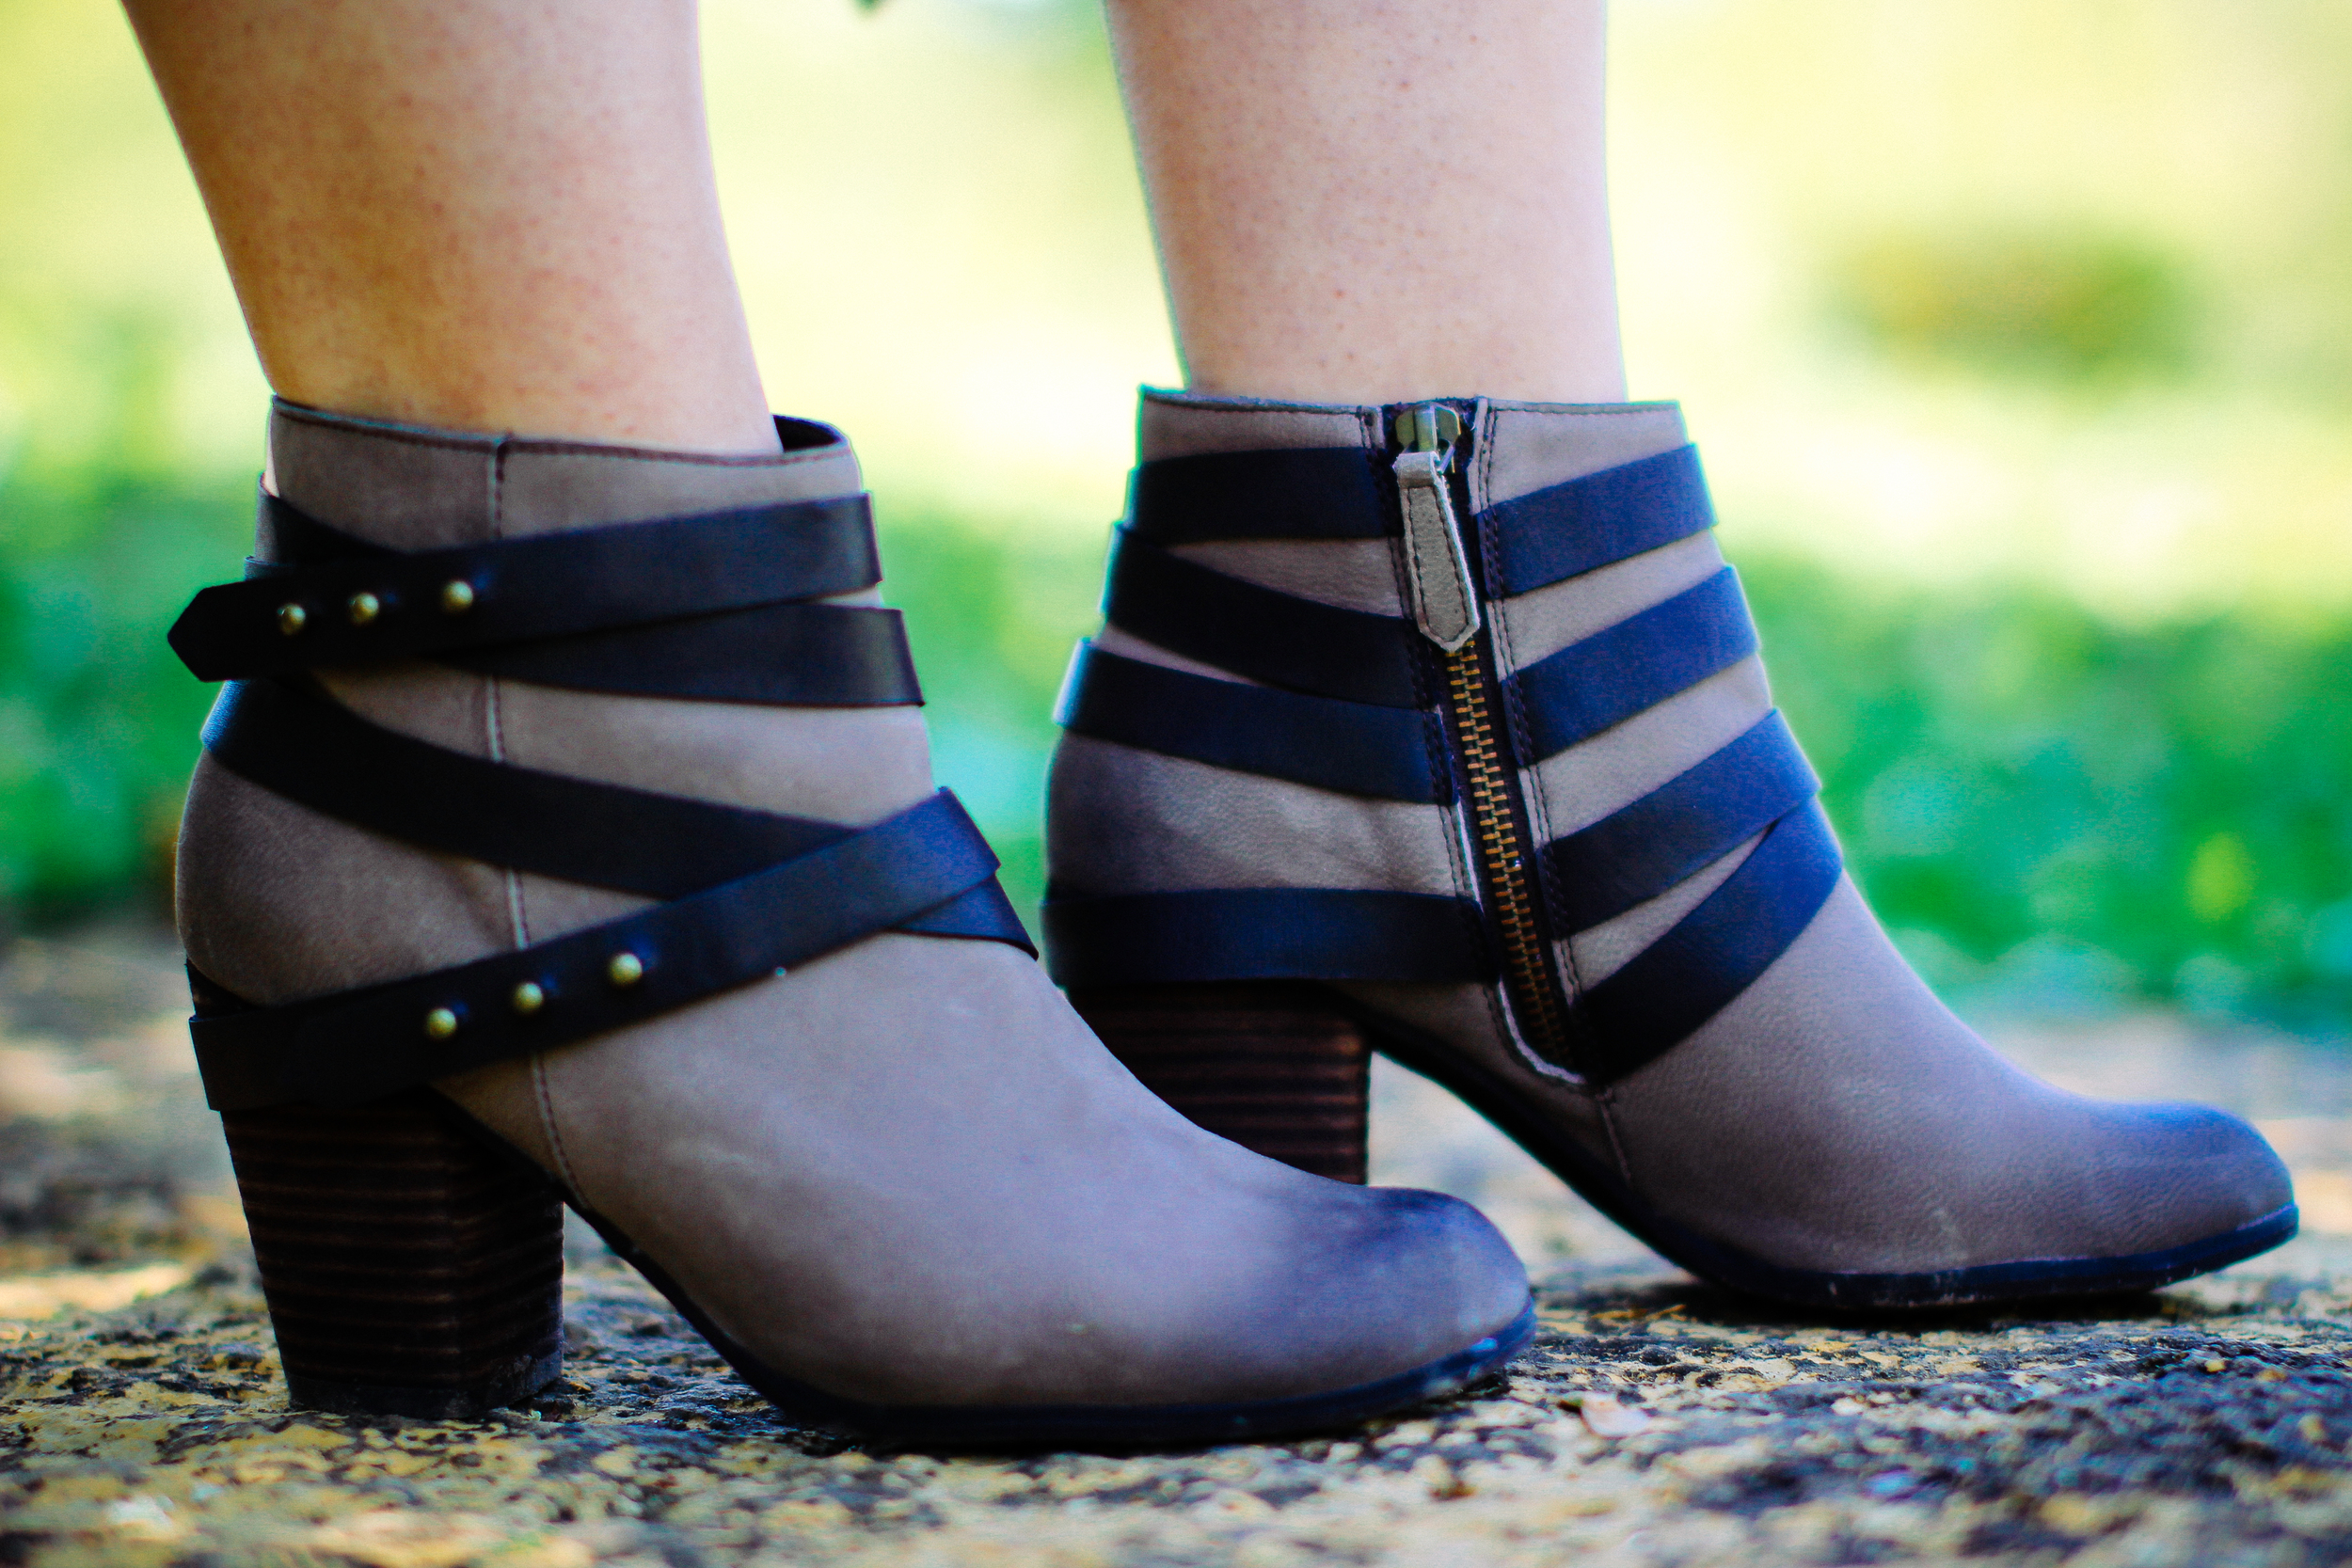 Spring Style - Nordstrom Booties via www.chelceytate.com